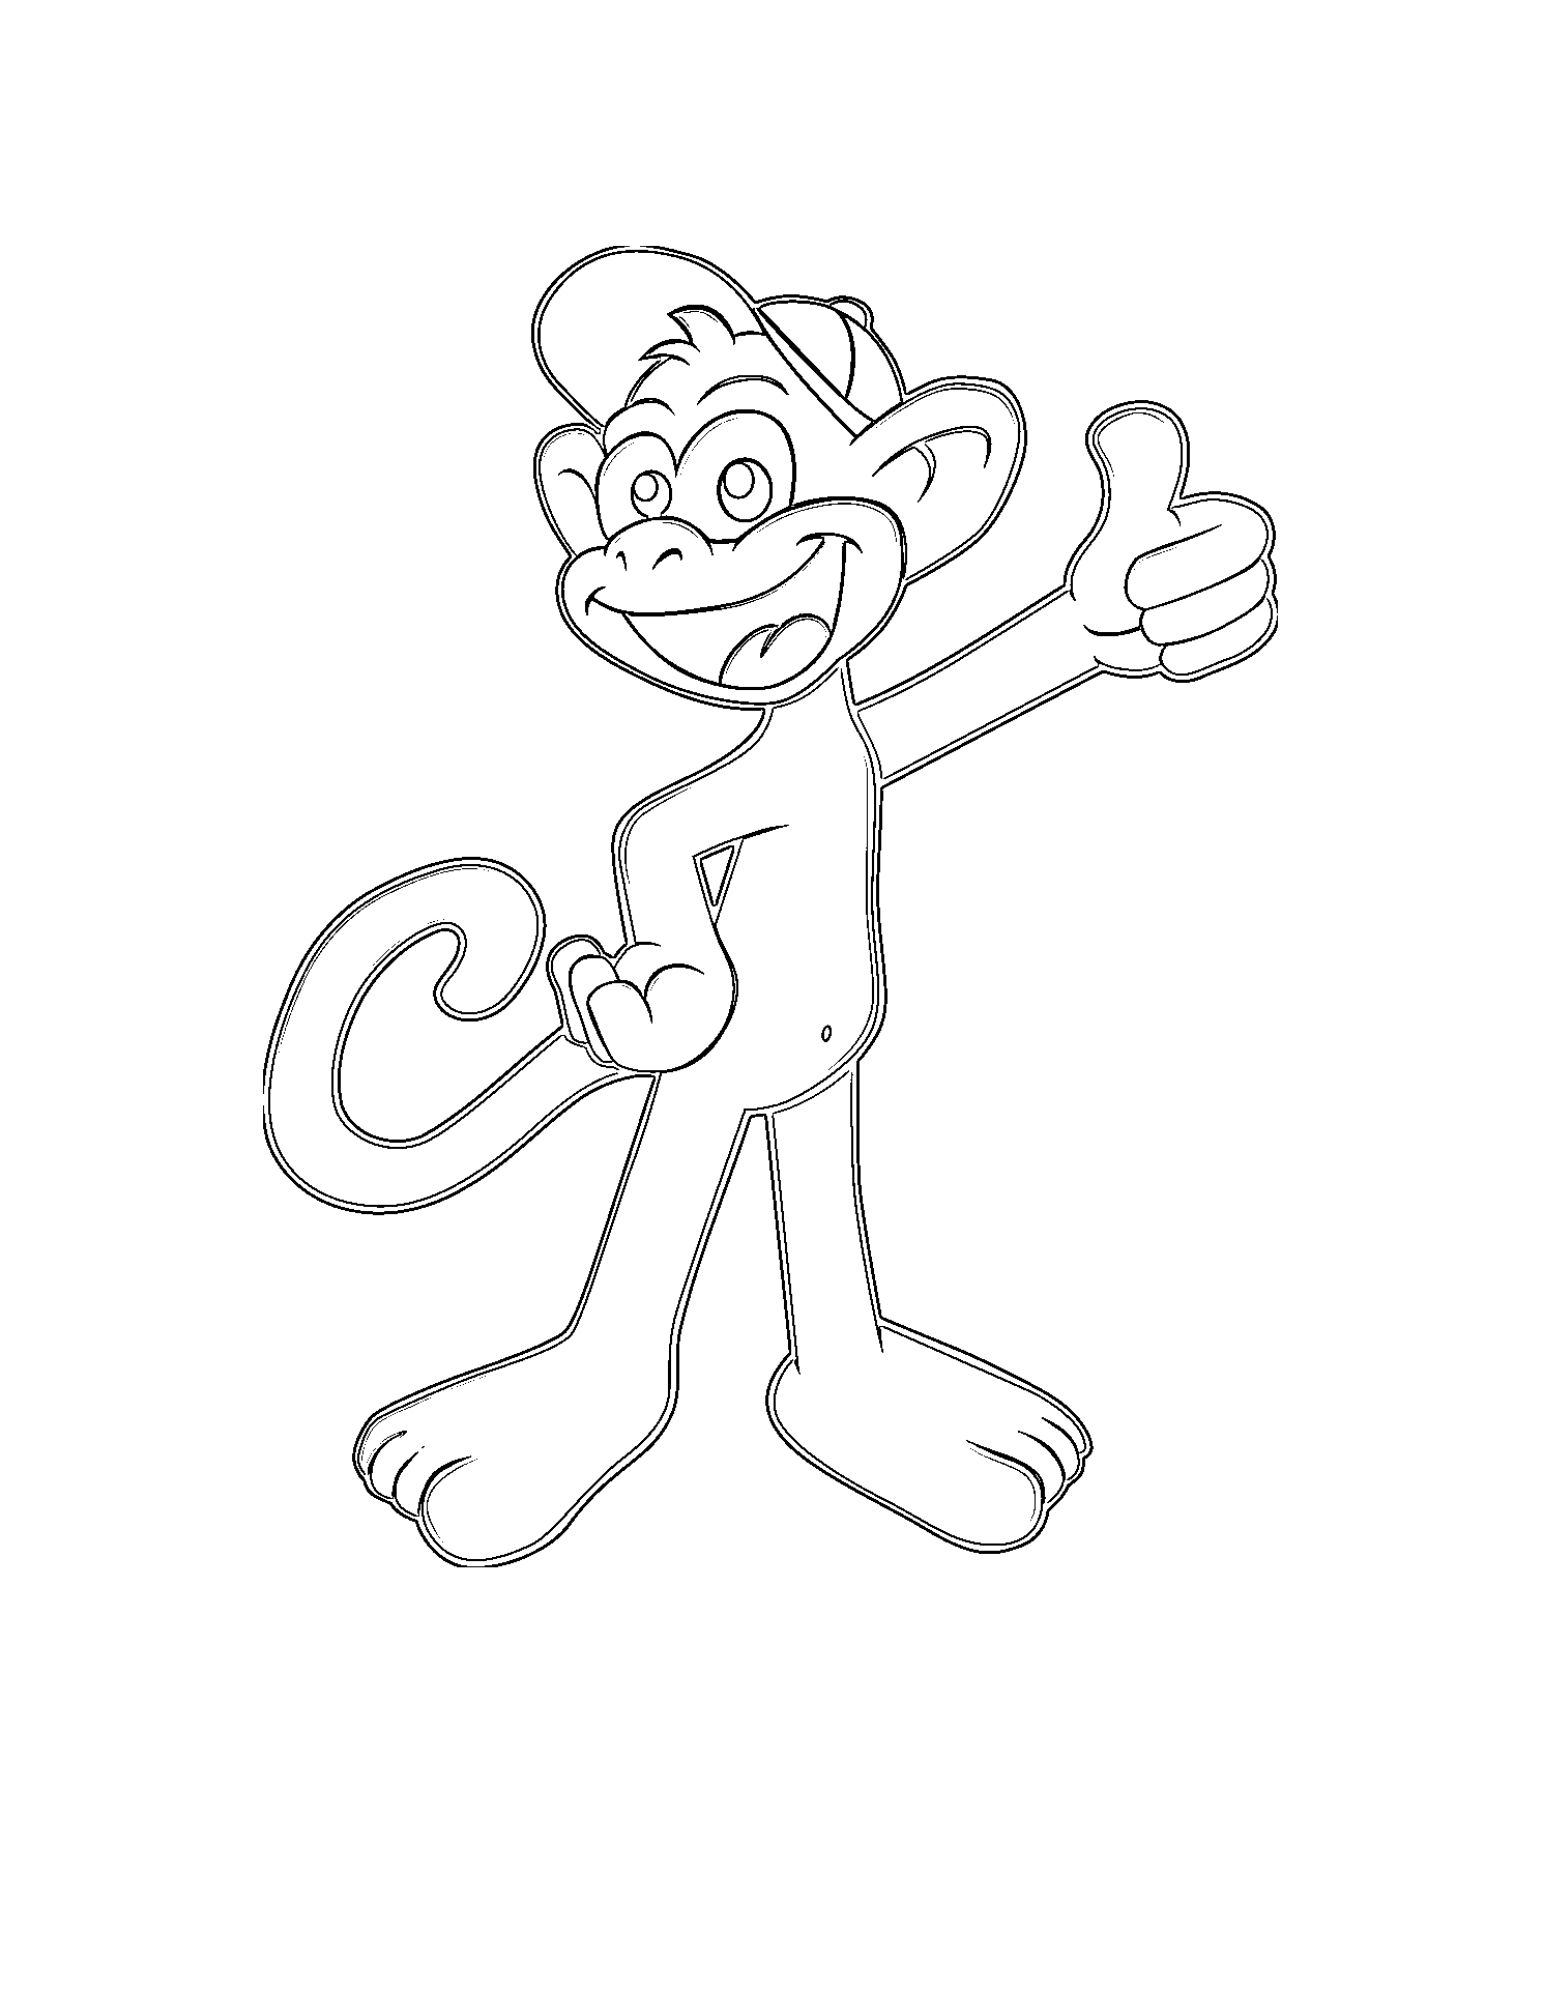 Free Printable Coloring Pages (Monkey)